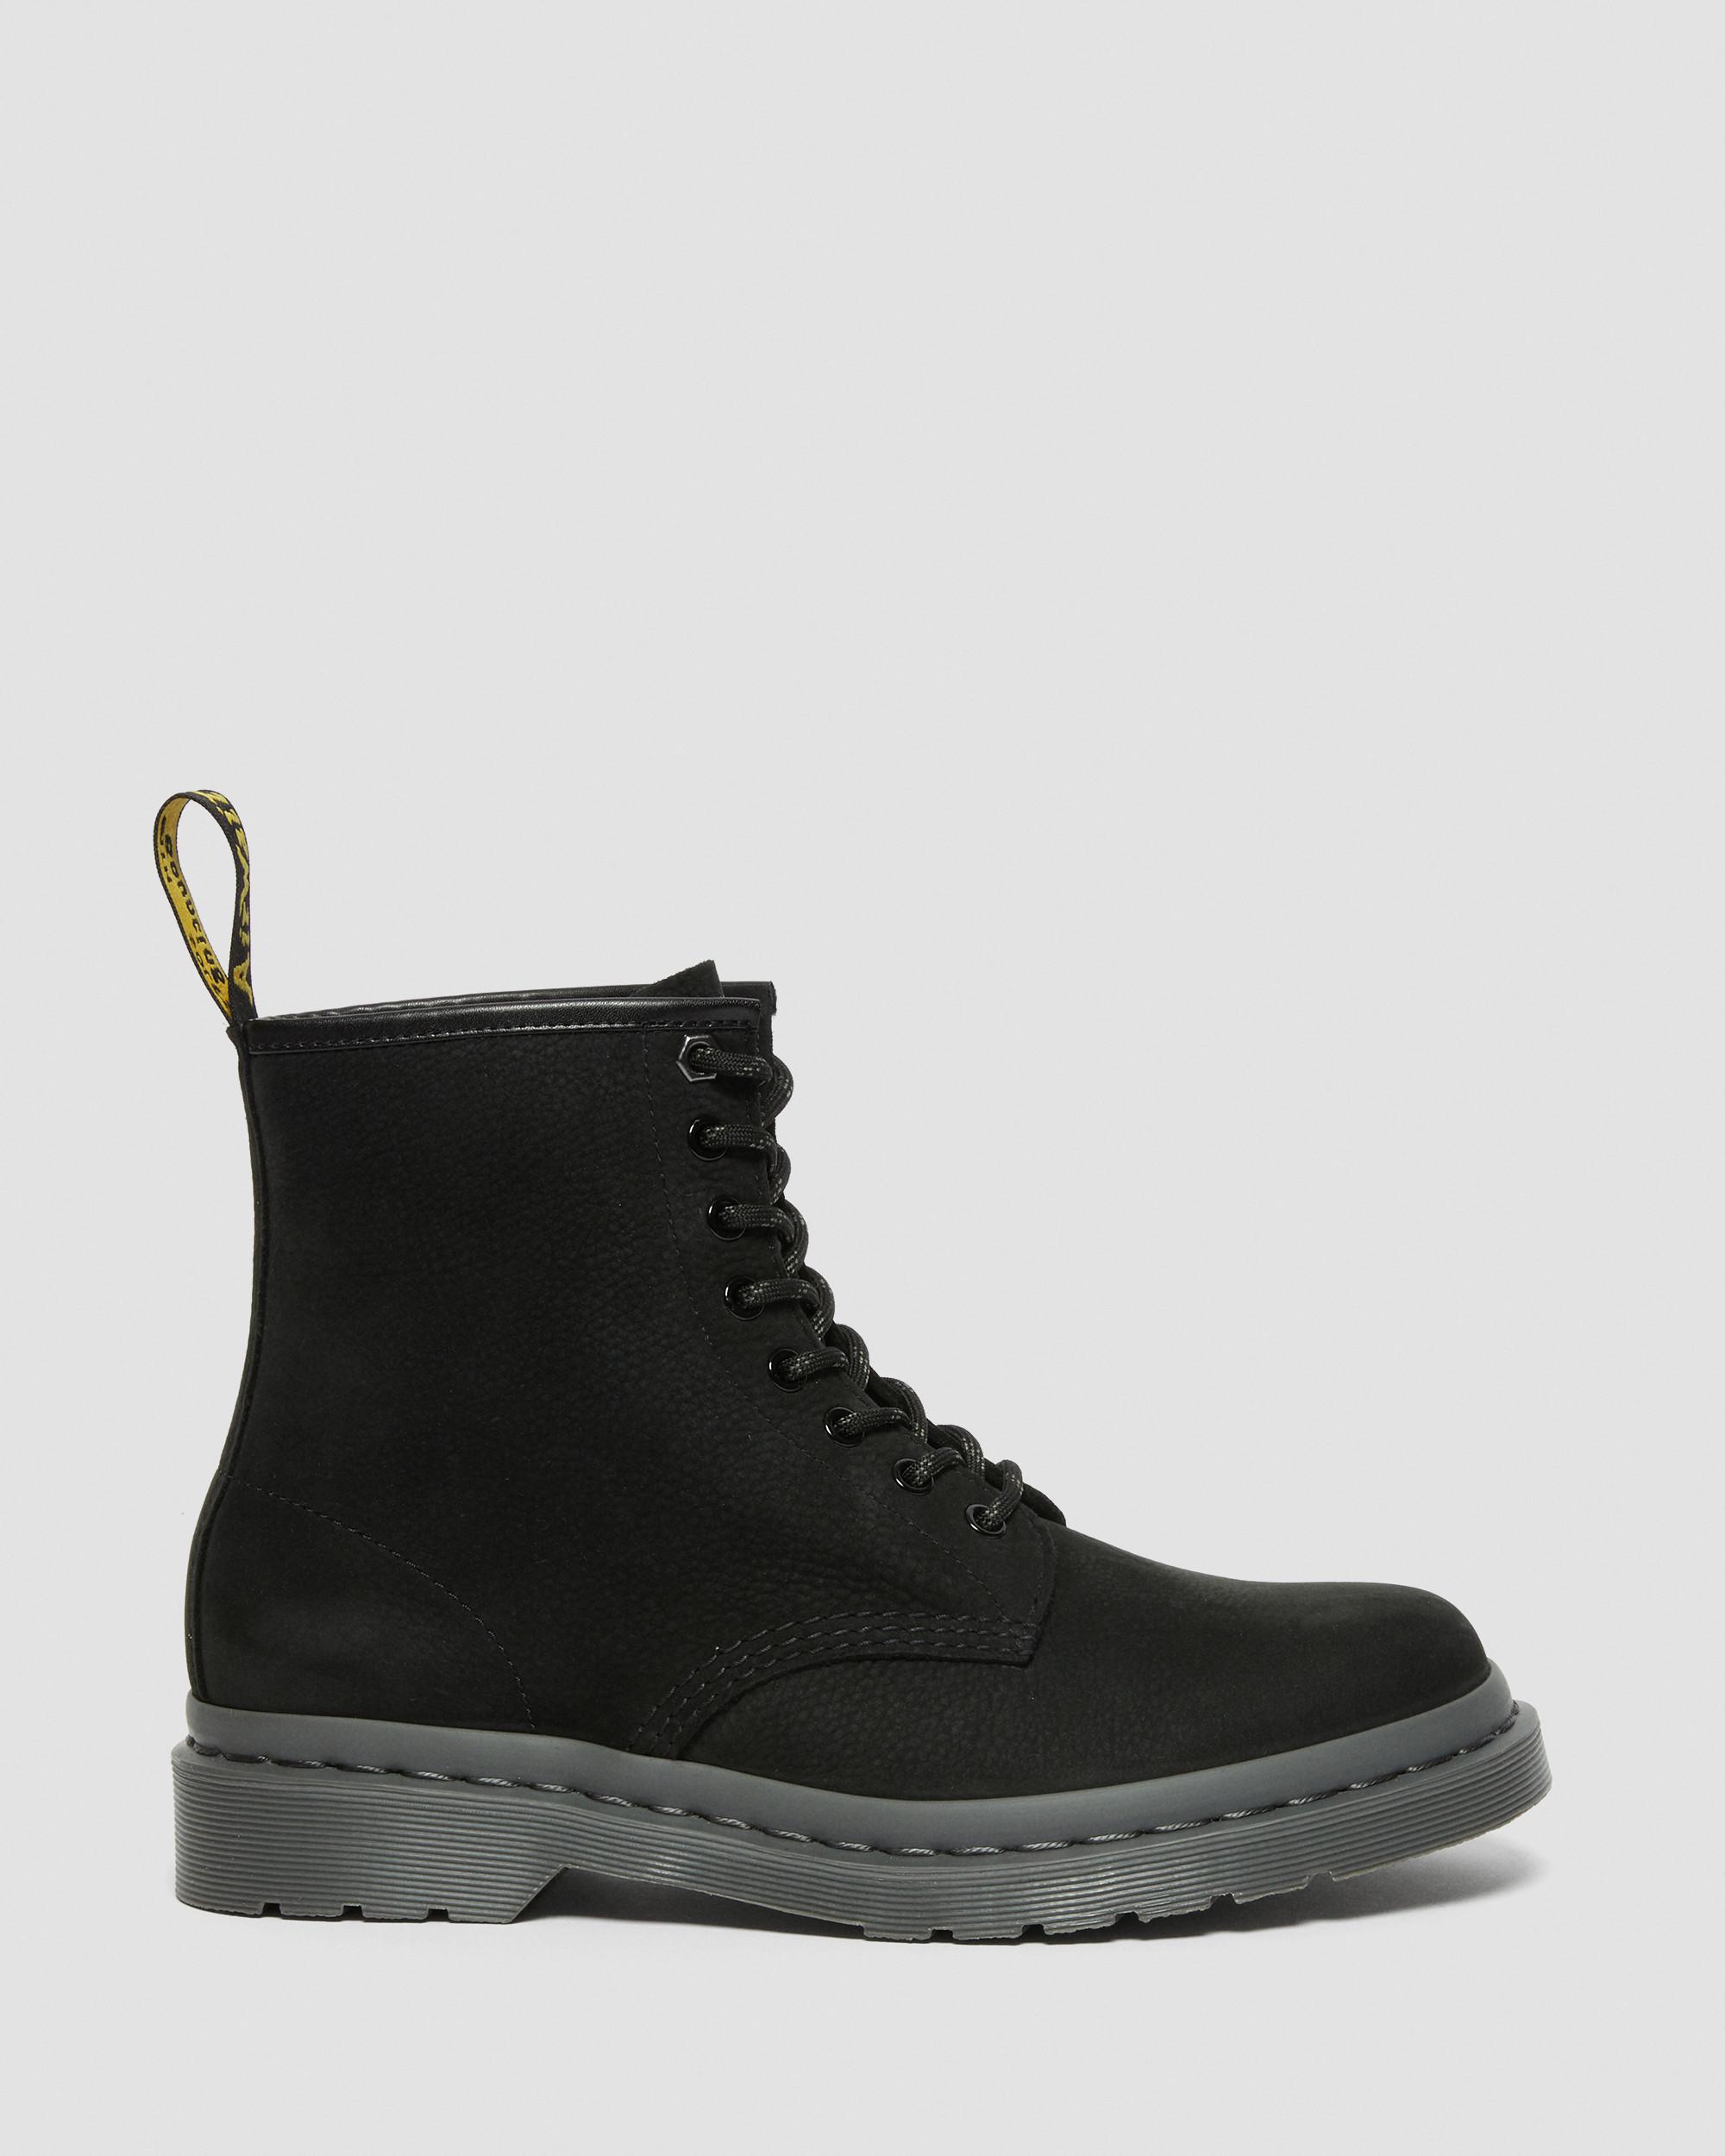 1460 Mono Milled Nubuck Leather Lace Up Boots, Black | Dr